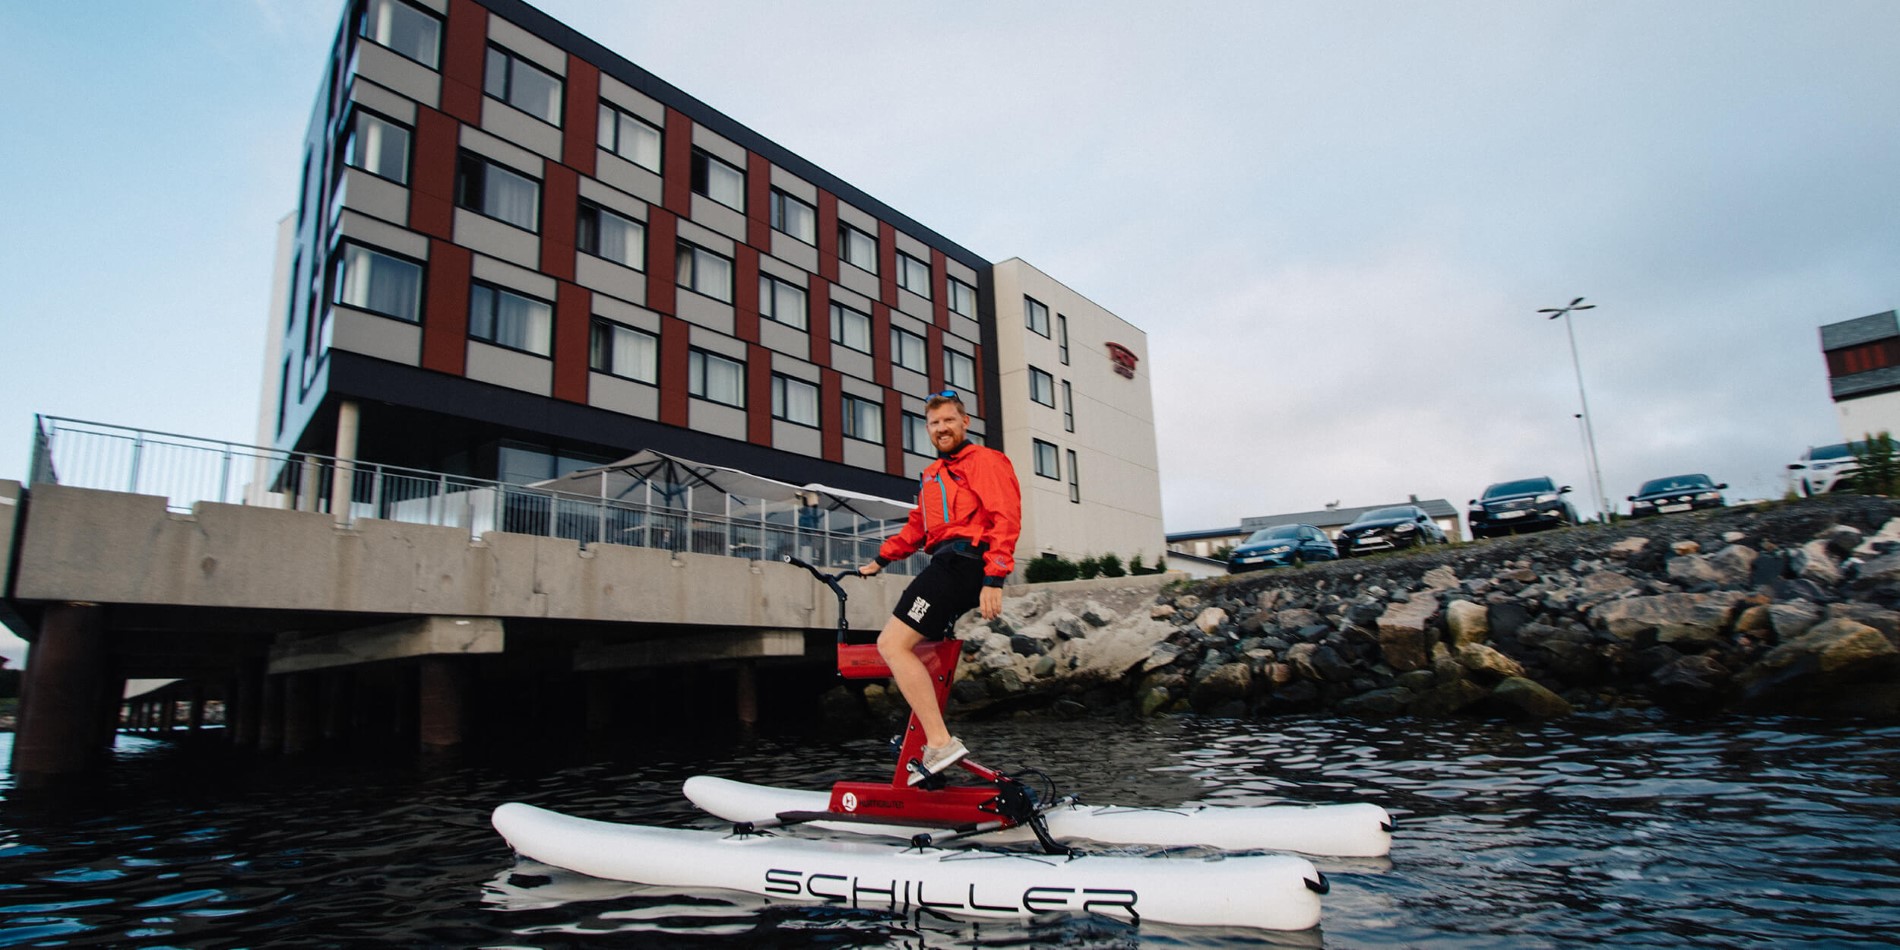 A man riding on the back of a boat next to a building